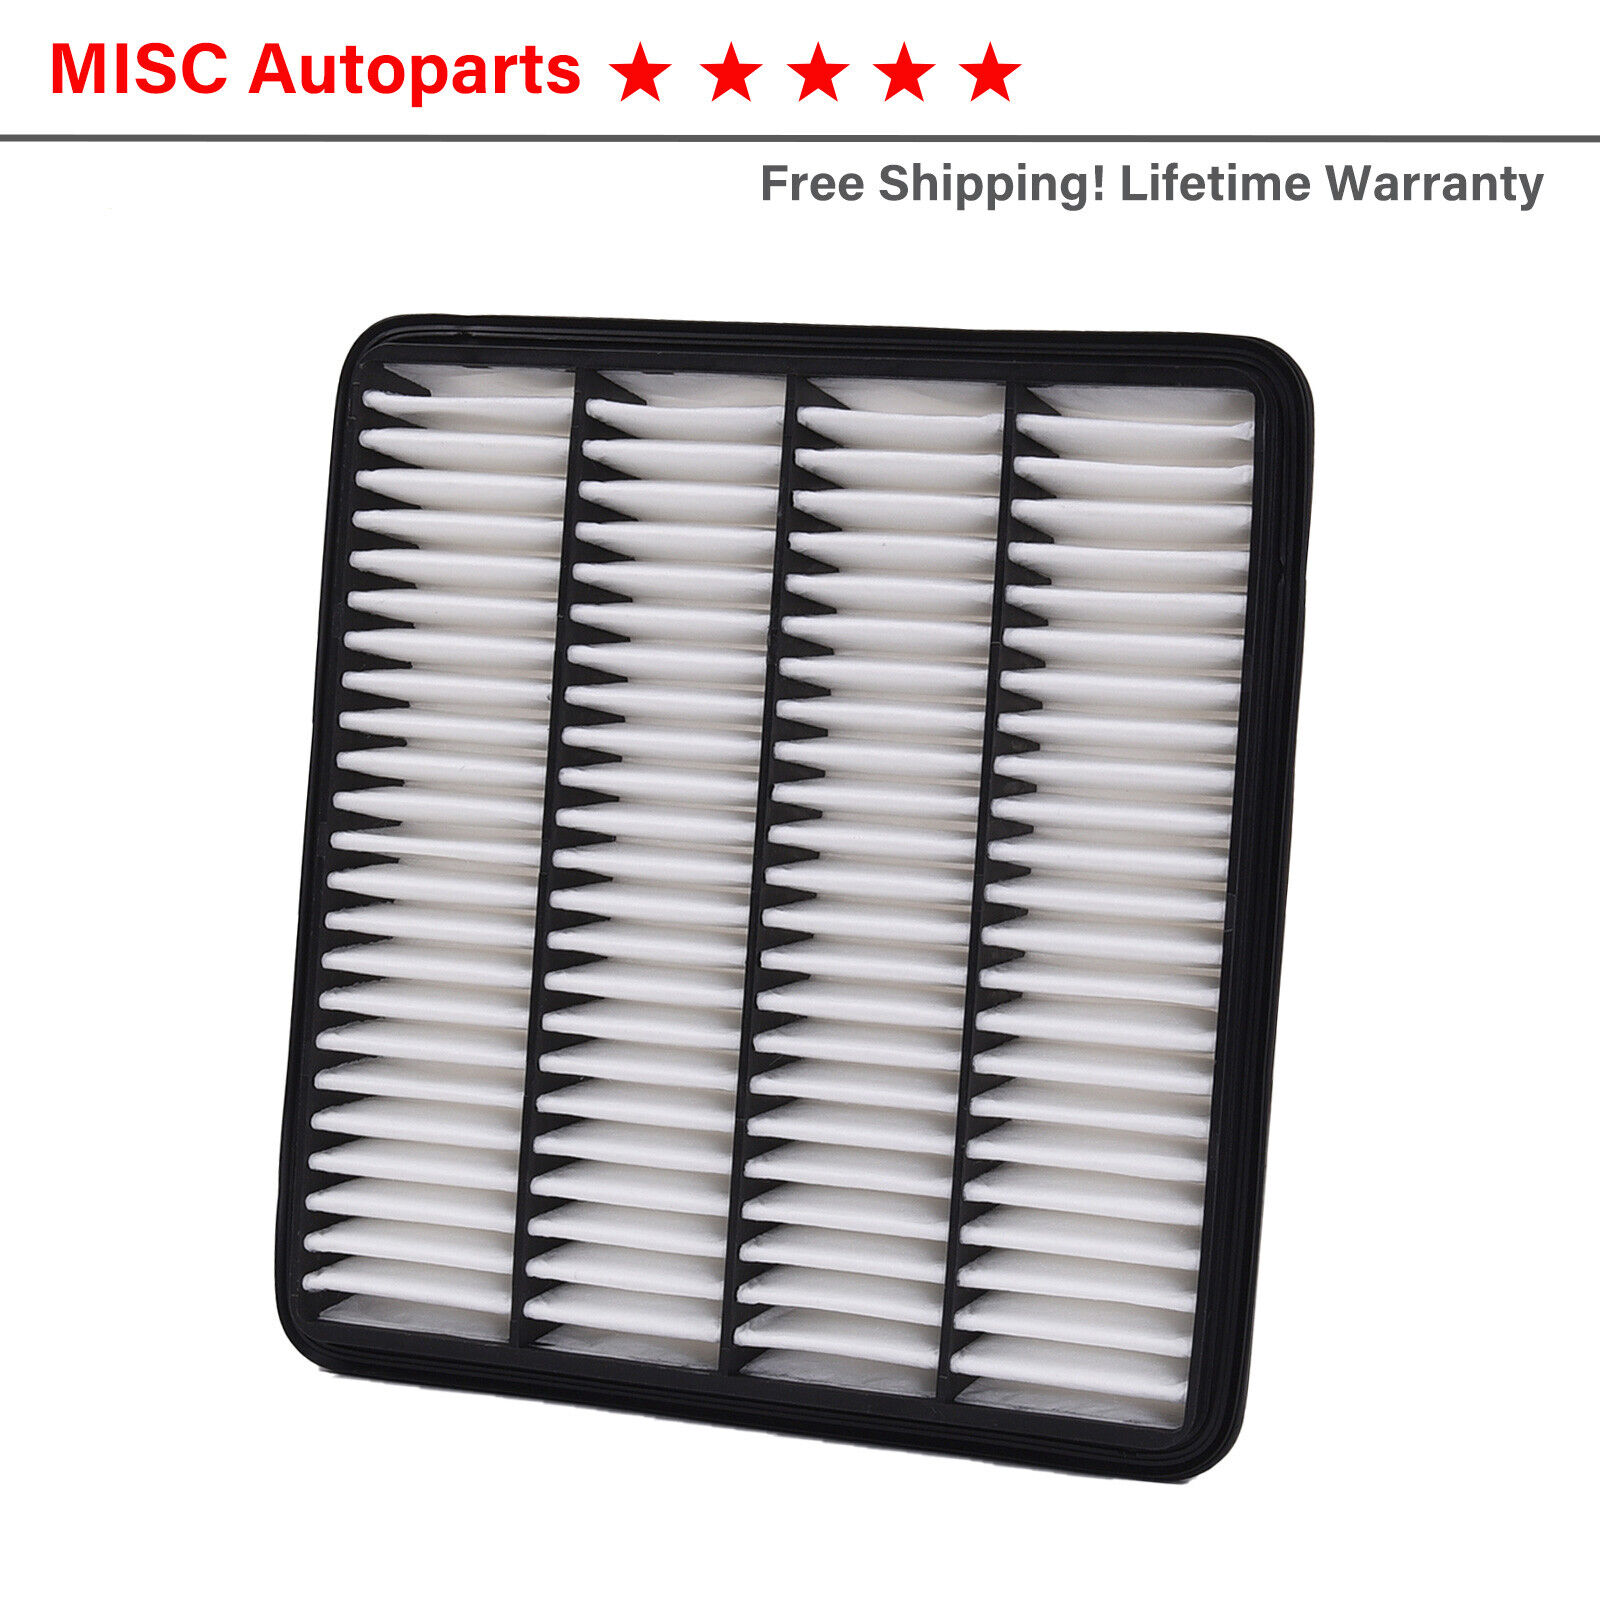 Engine Air Filter For Toyota Tundra Sequoia Land Cruiser Lx570